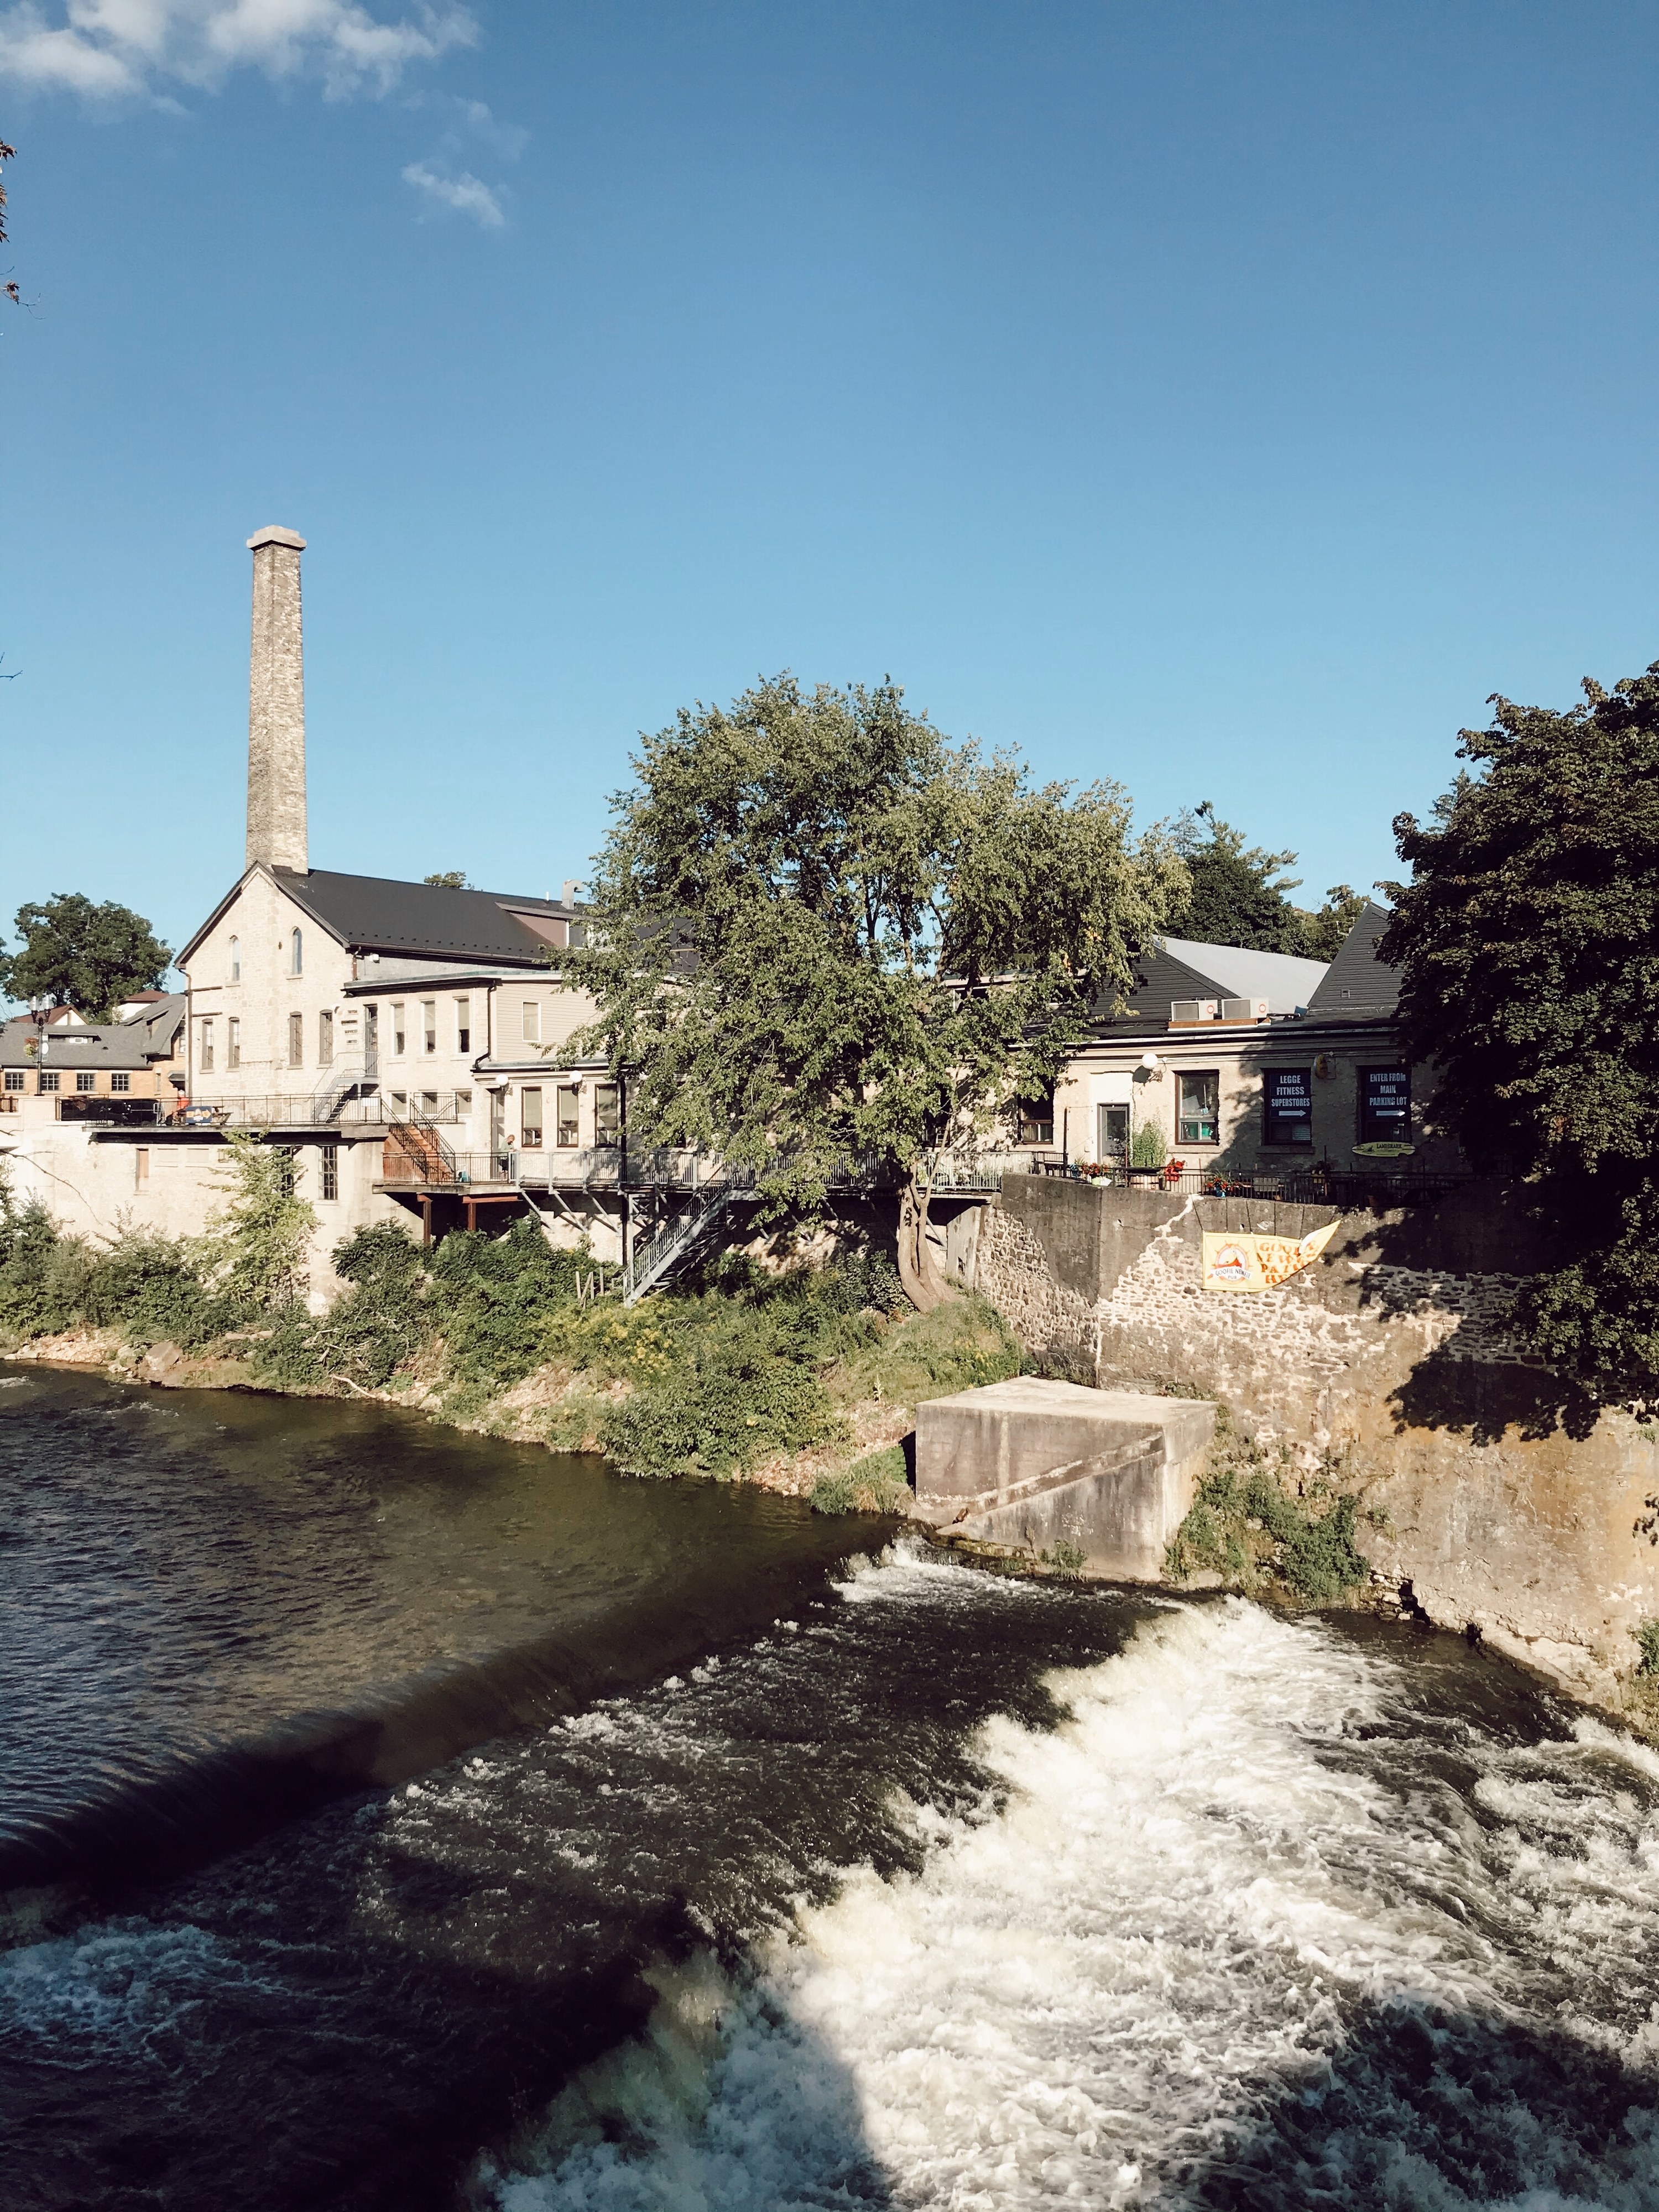 Photograph of a fast river, rushing along a tall stone wall, where several European-style stone buildings sit. One of the stone buildings has a large chimney